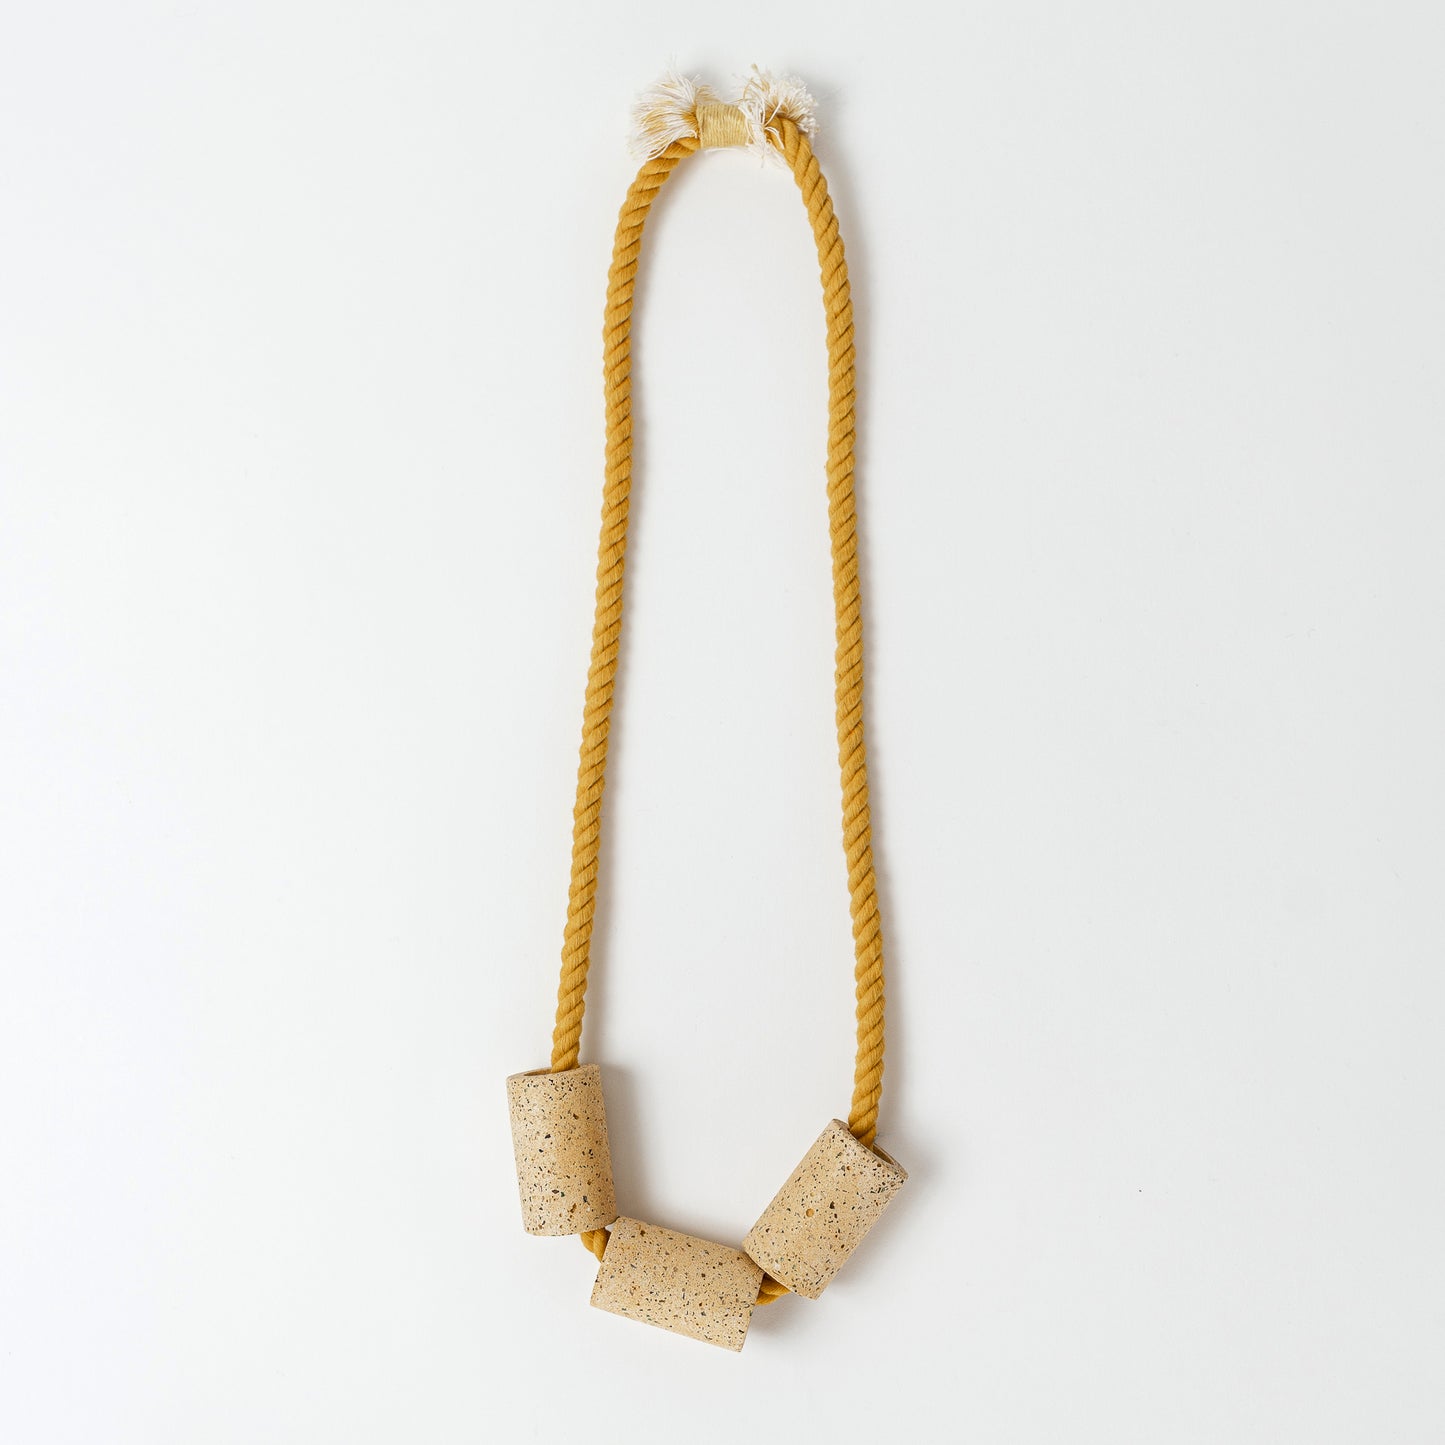 Dyed cotton rope necklace with handmade terrazzo beads in marigold.